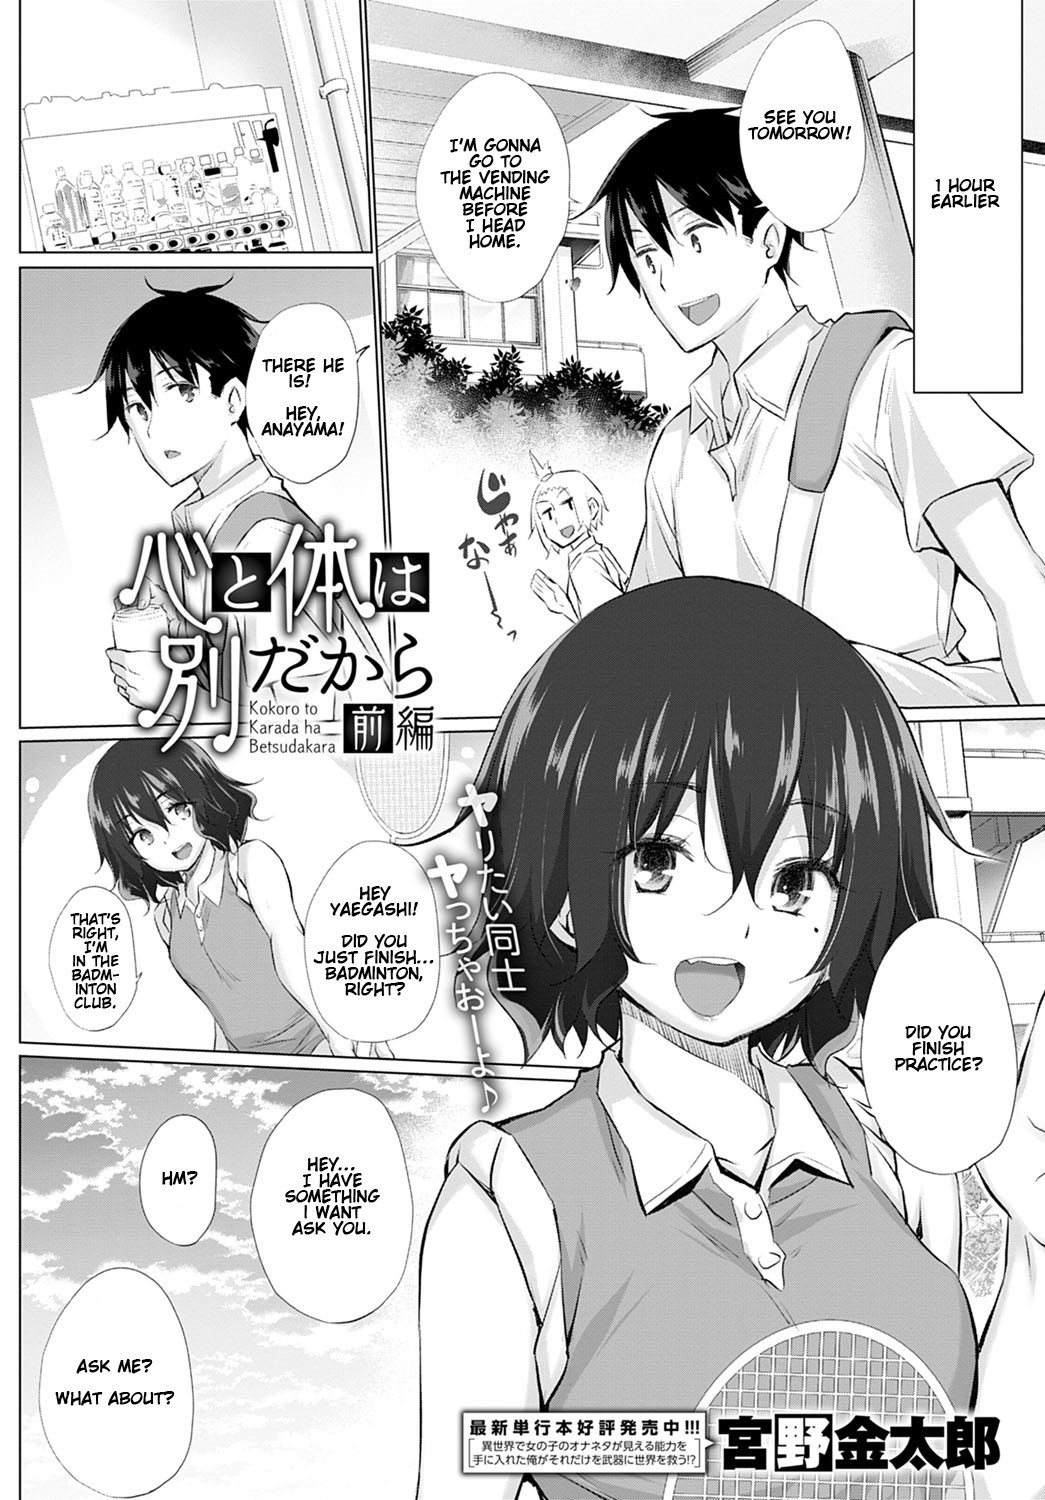 Hentai Manga Comic-What the Body and Heart Want Are Different #1-Read-2